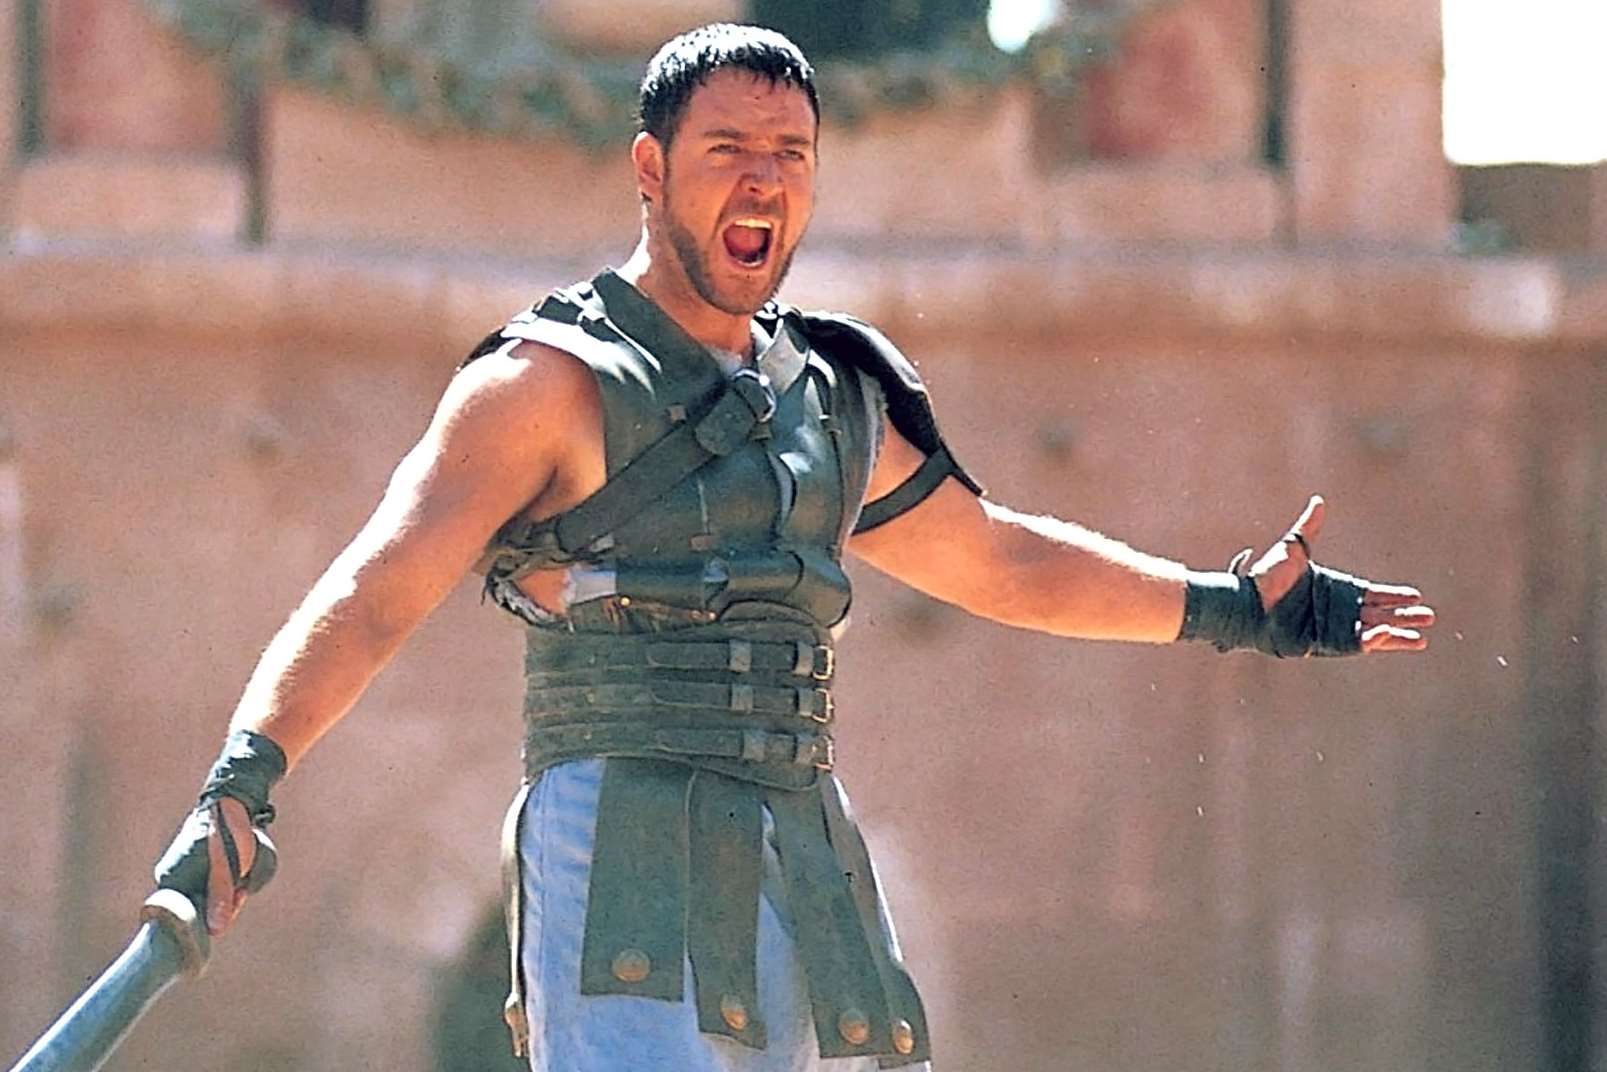 Gladiator won multiple awards, including Best Picture, Best Actor for Russel Crowe and three other Oscars in 2001